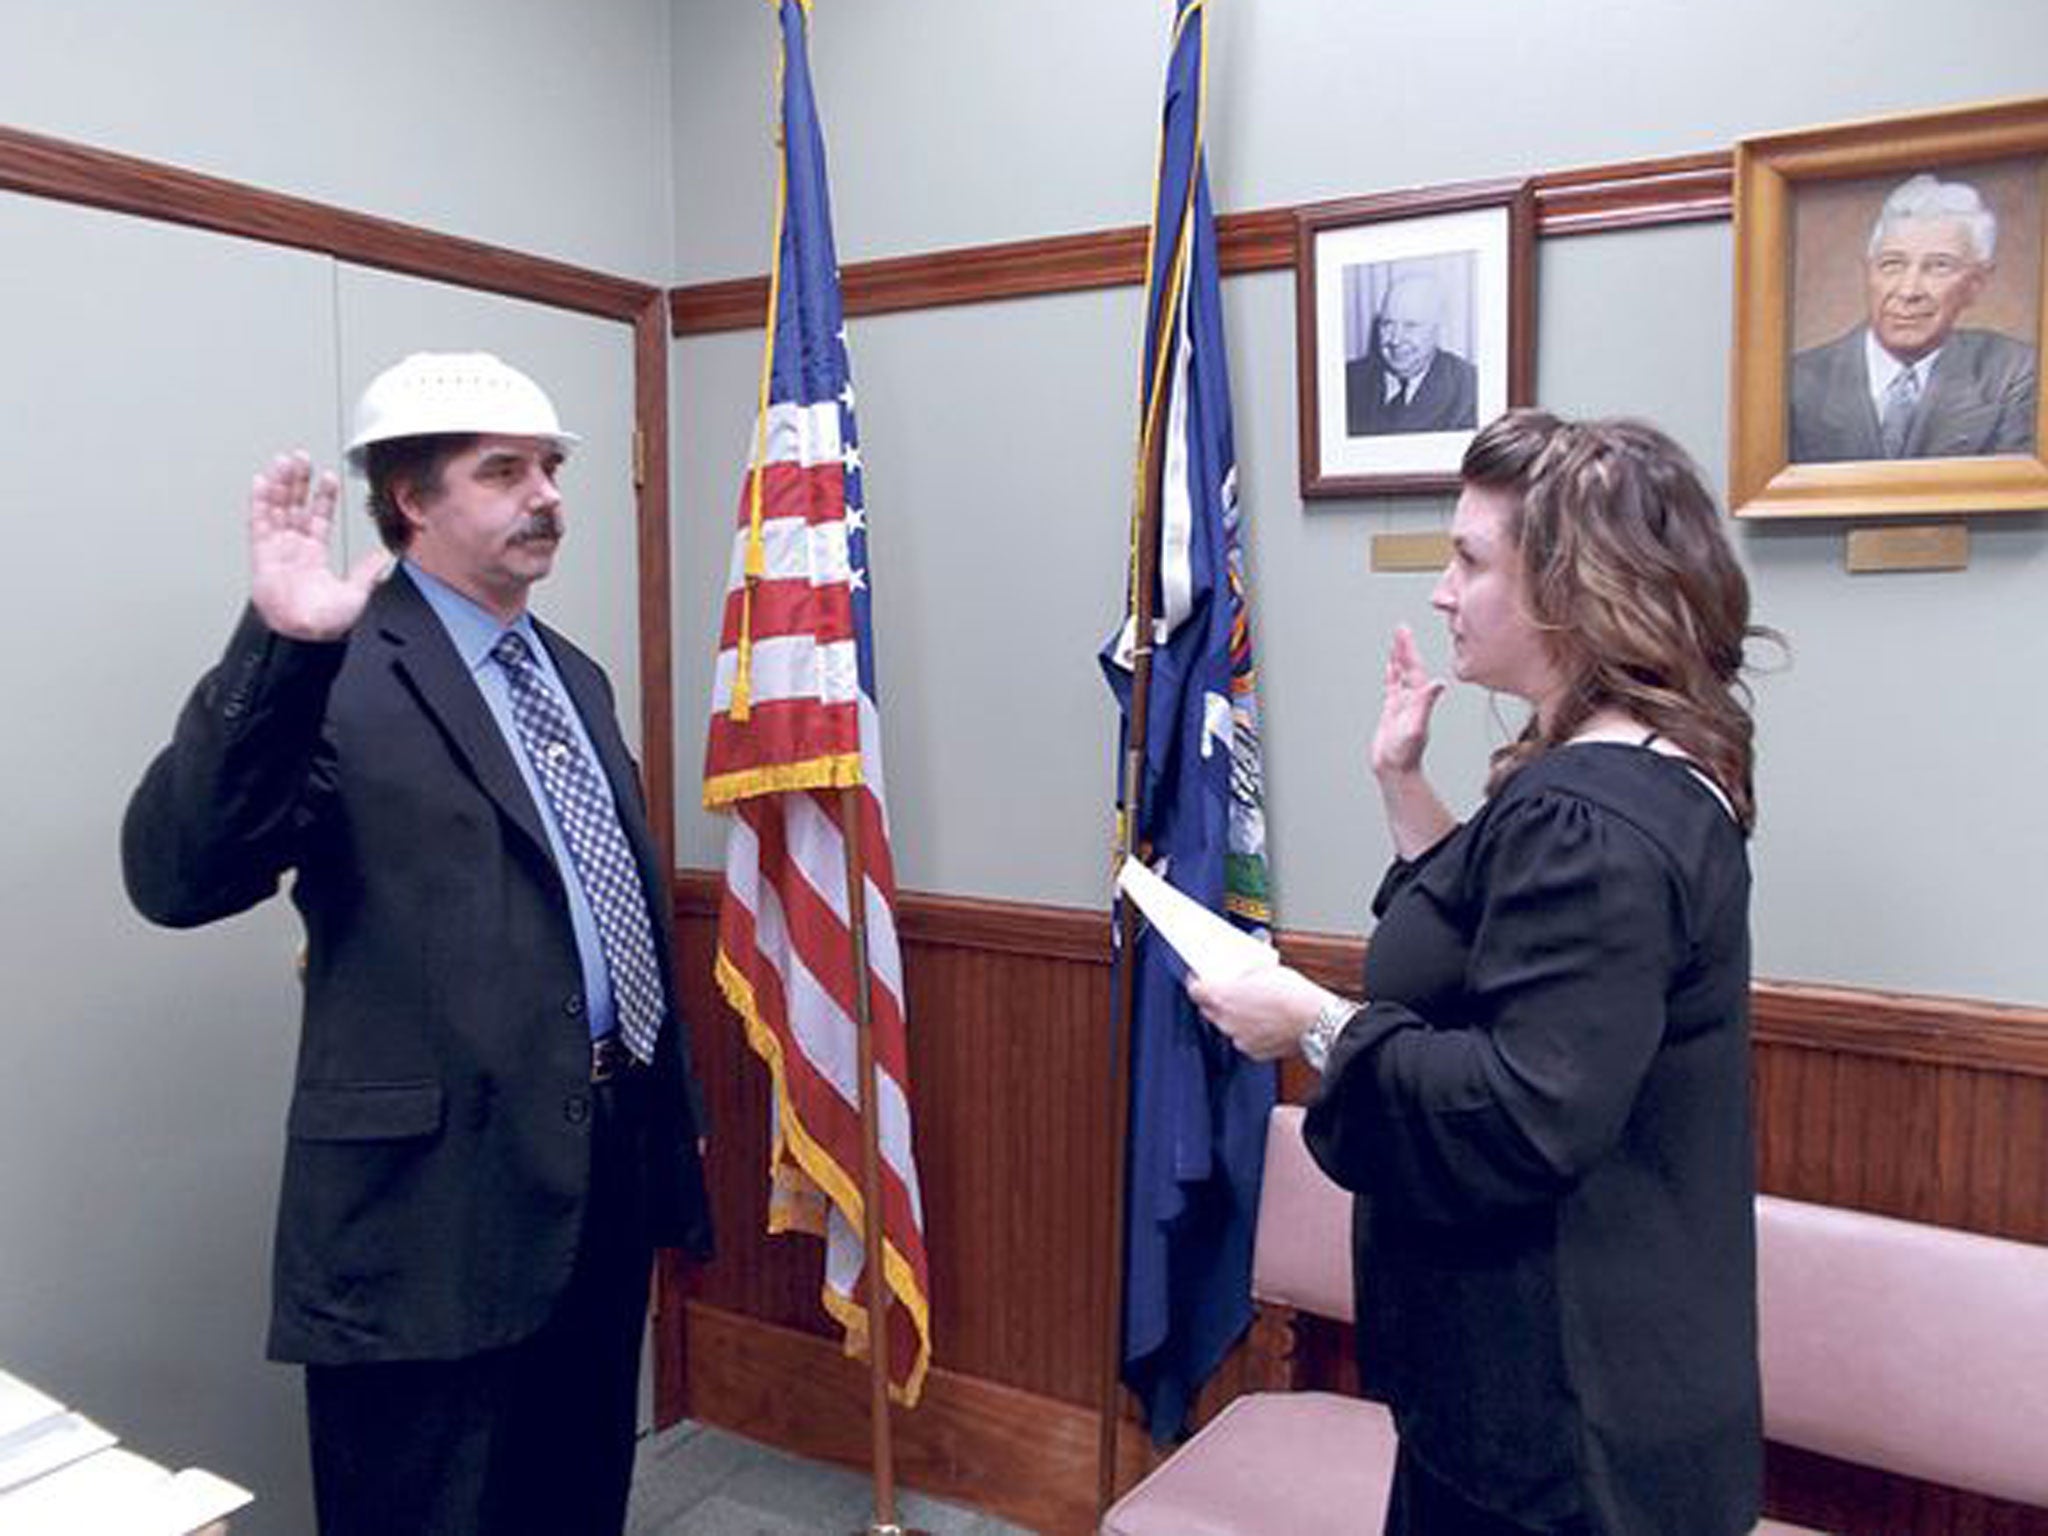 Newly-seated Pomfret Town Council member Christopher Schaeffer (left) recites the oath of office read to him by Town Clerk Allison Dispense. Schaeffer wore a colander, which is associated with a unique religious movement called the Church of the Flying Spaghetti Monster.